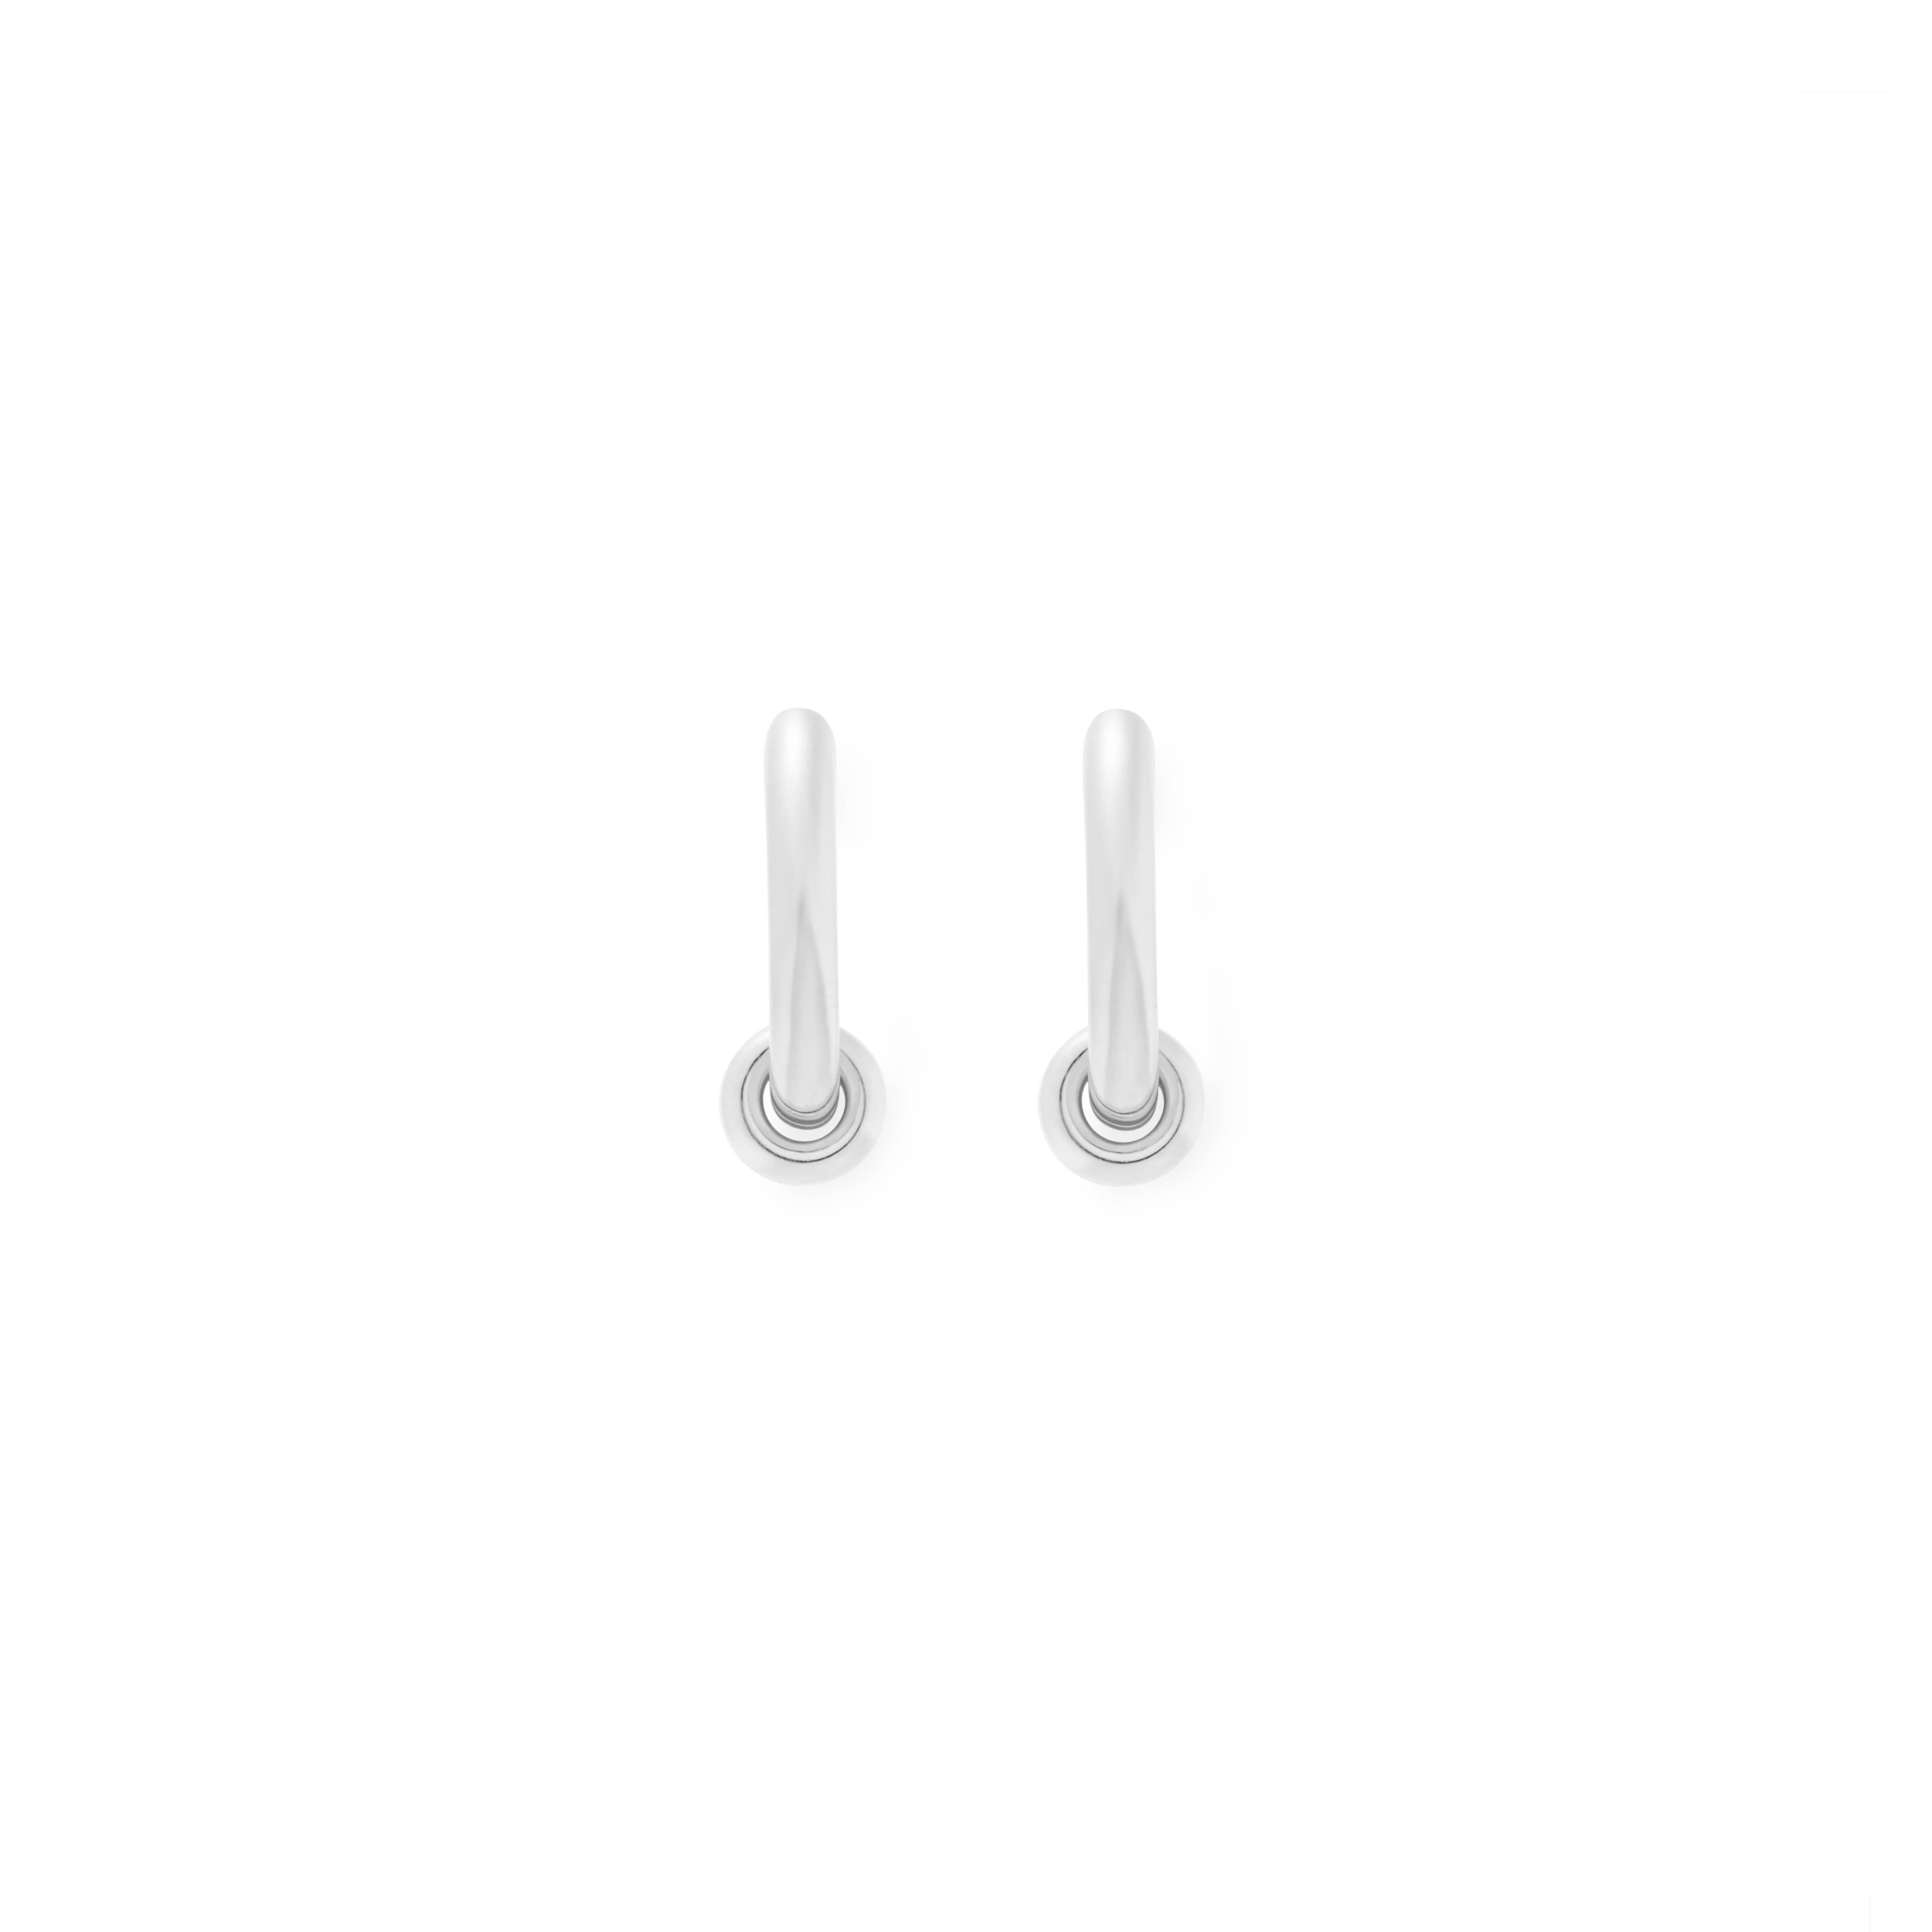 Mistova's knot earrings are easy to wear, with detachable rings, which add flexibility to the earrings. Made from high quality sterling silver these earrings are a classic addition to ones jewelry collection.